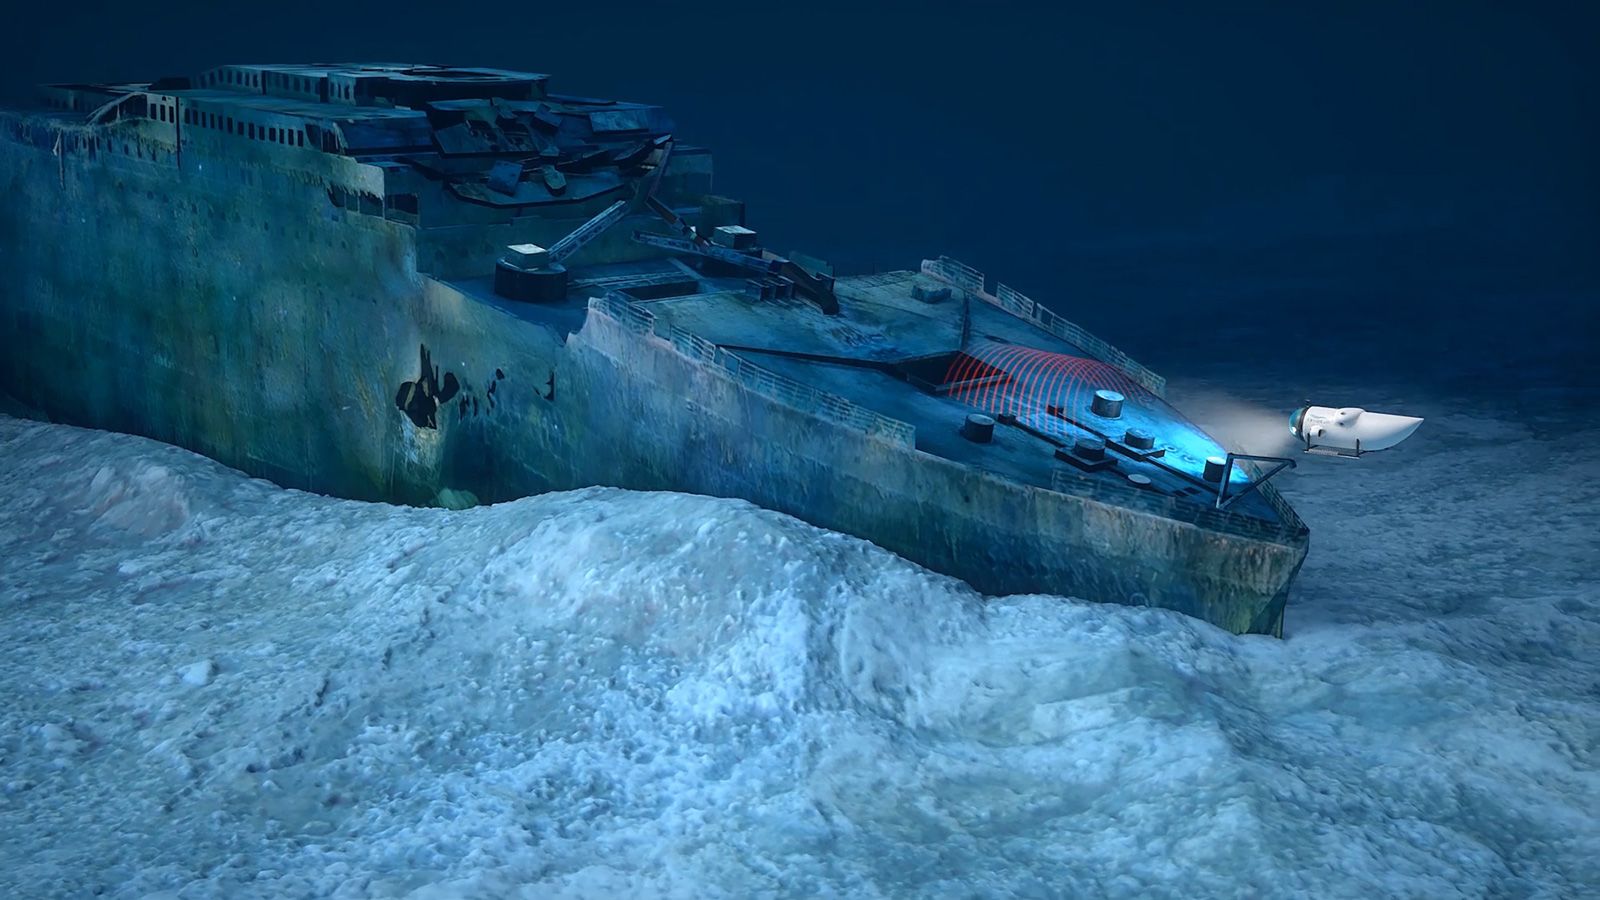 Diving tours of Titanic wreck site to begin in 2019 | CNN